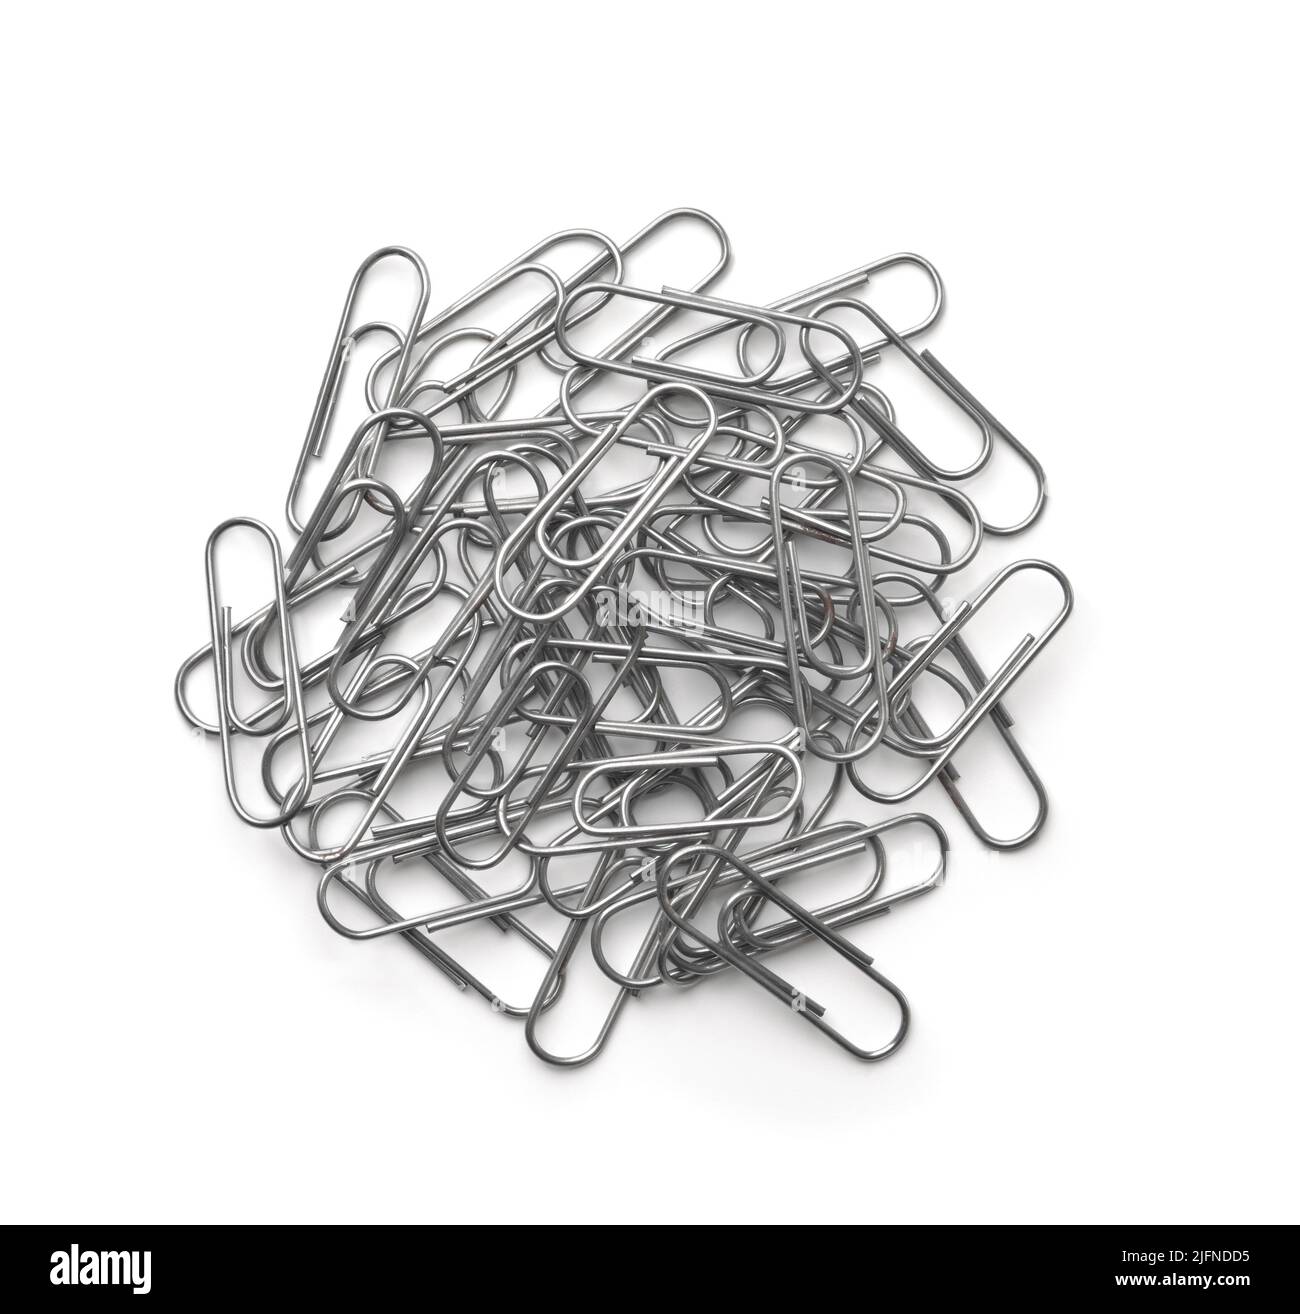 Top view of steel paper clips isolated on white Stock Photo